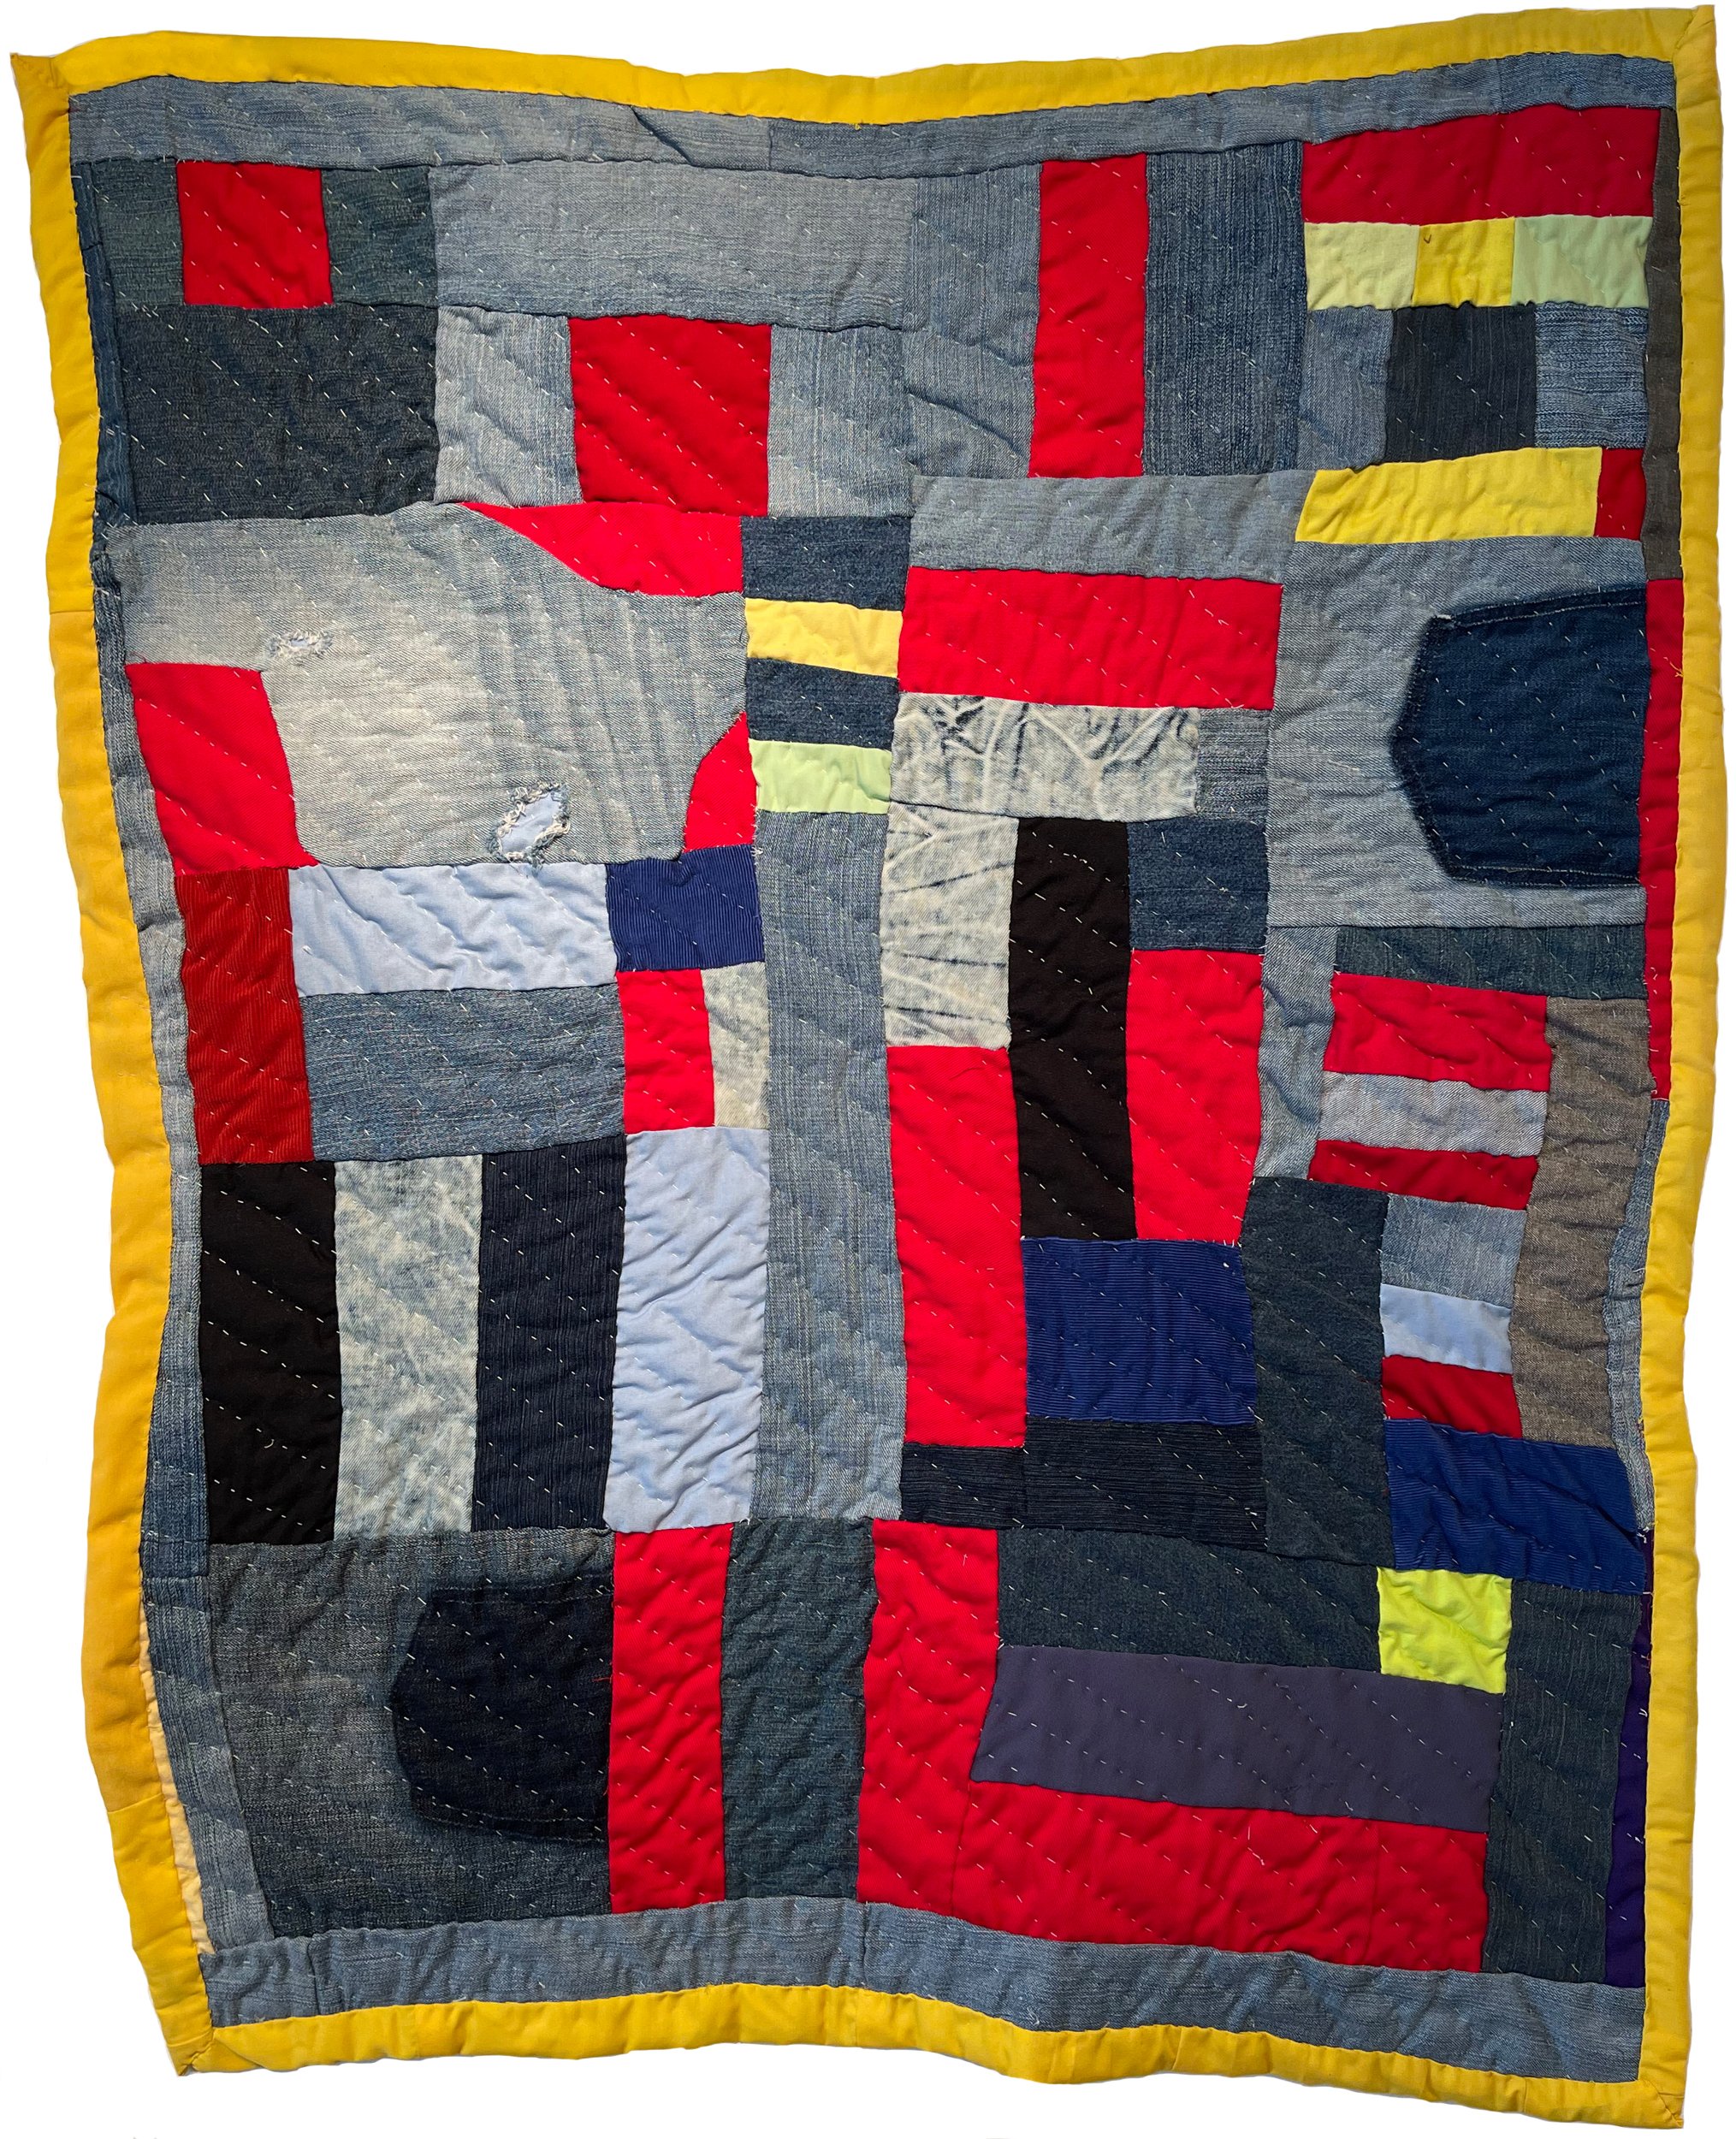   Stella Mae Pettway (Gee’s Bend, AL)    Improvisational quilt, 2021.    42” x 34”  Cottons, corduroy, denim  Hand-pieced, hand-quilted    ASK ABOUT THIS QUILT   